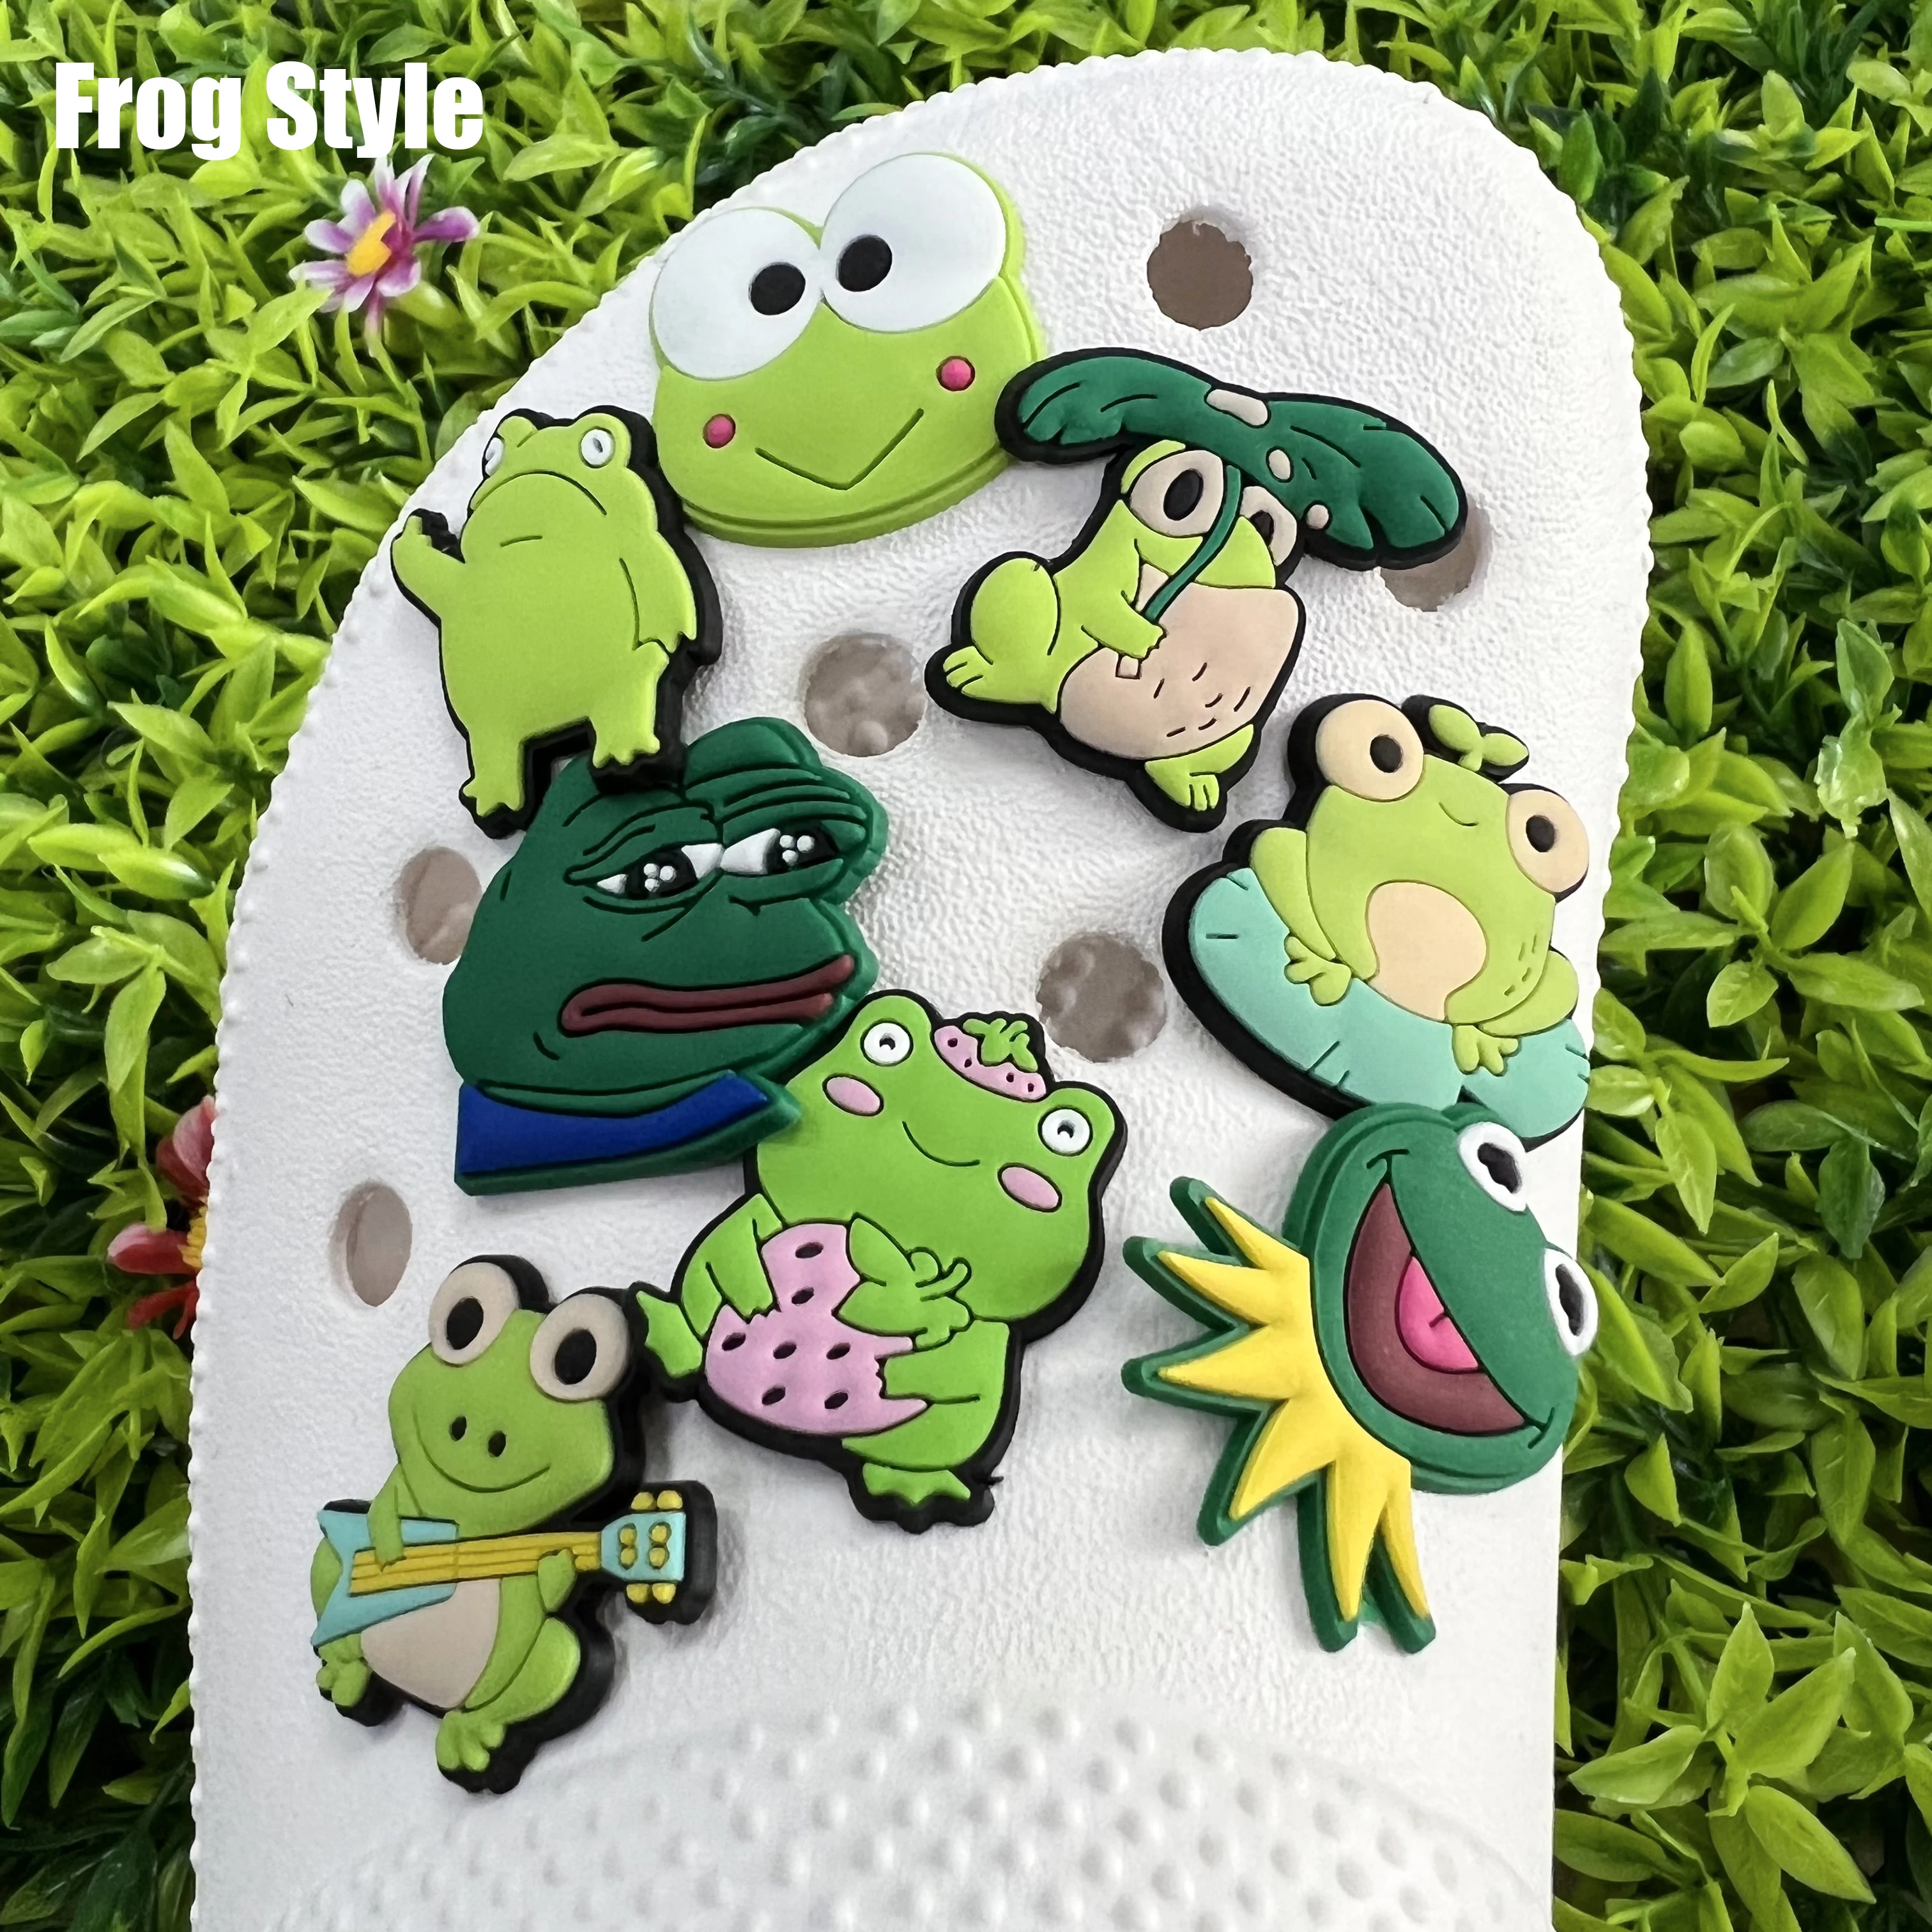 

1PCS Frog Style Series PVC Shoe Charms for Croc Buckles Button Slipper Accessories Ornament Xmas Gift